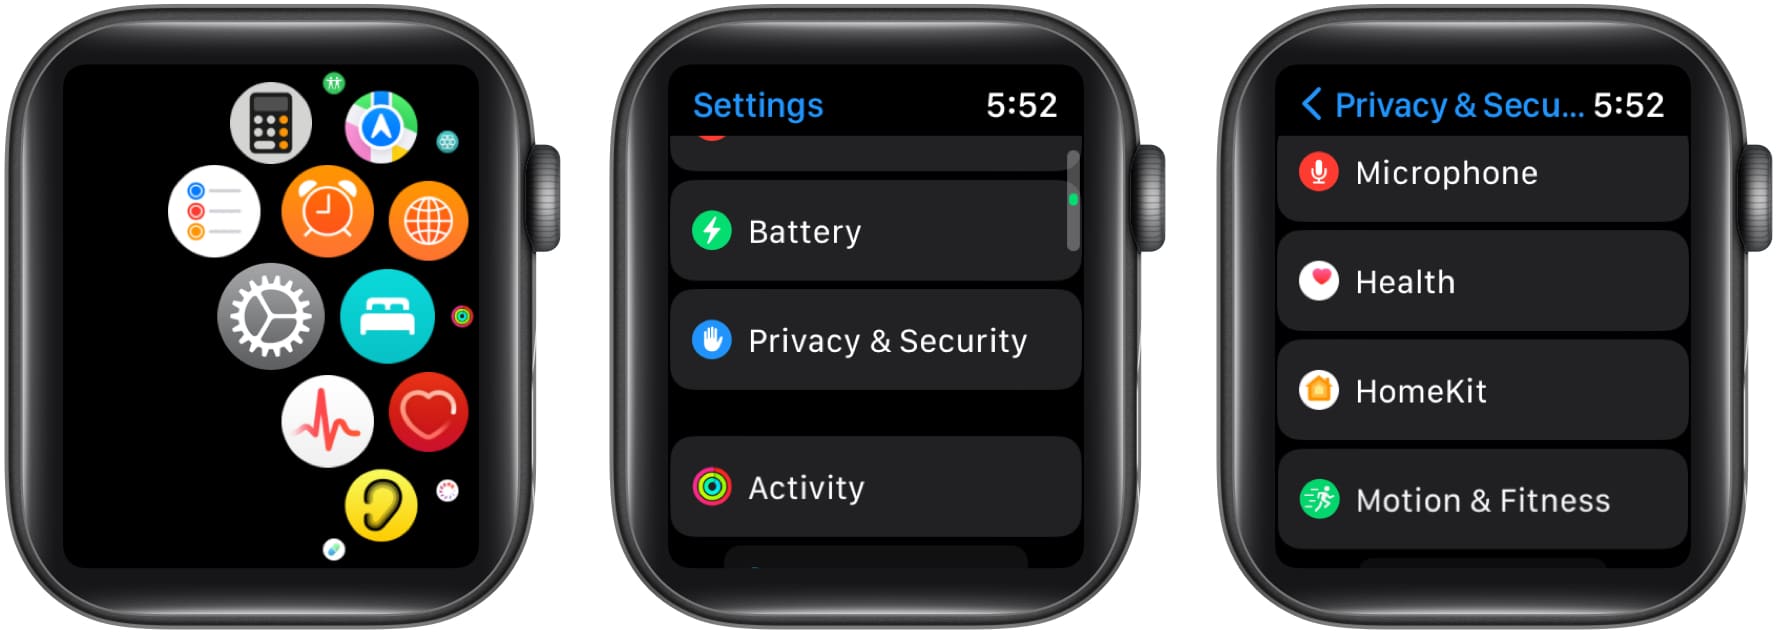 Tap Privacy and Security, select Health on Apple Watch